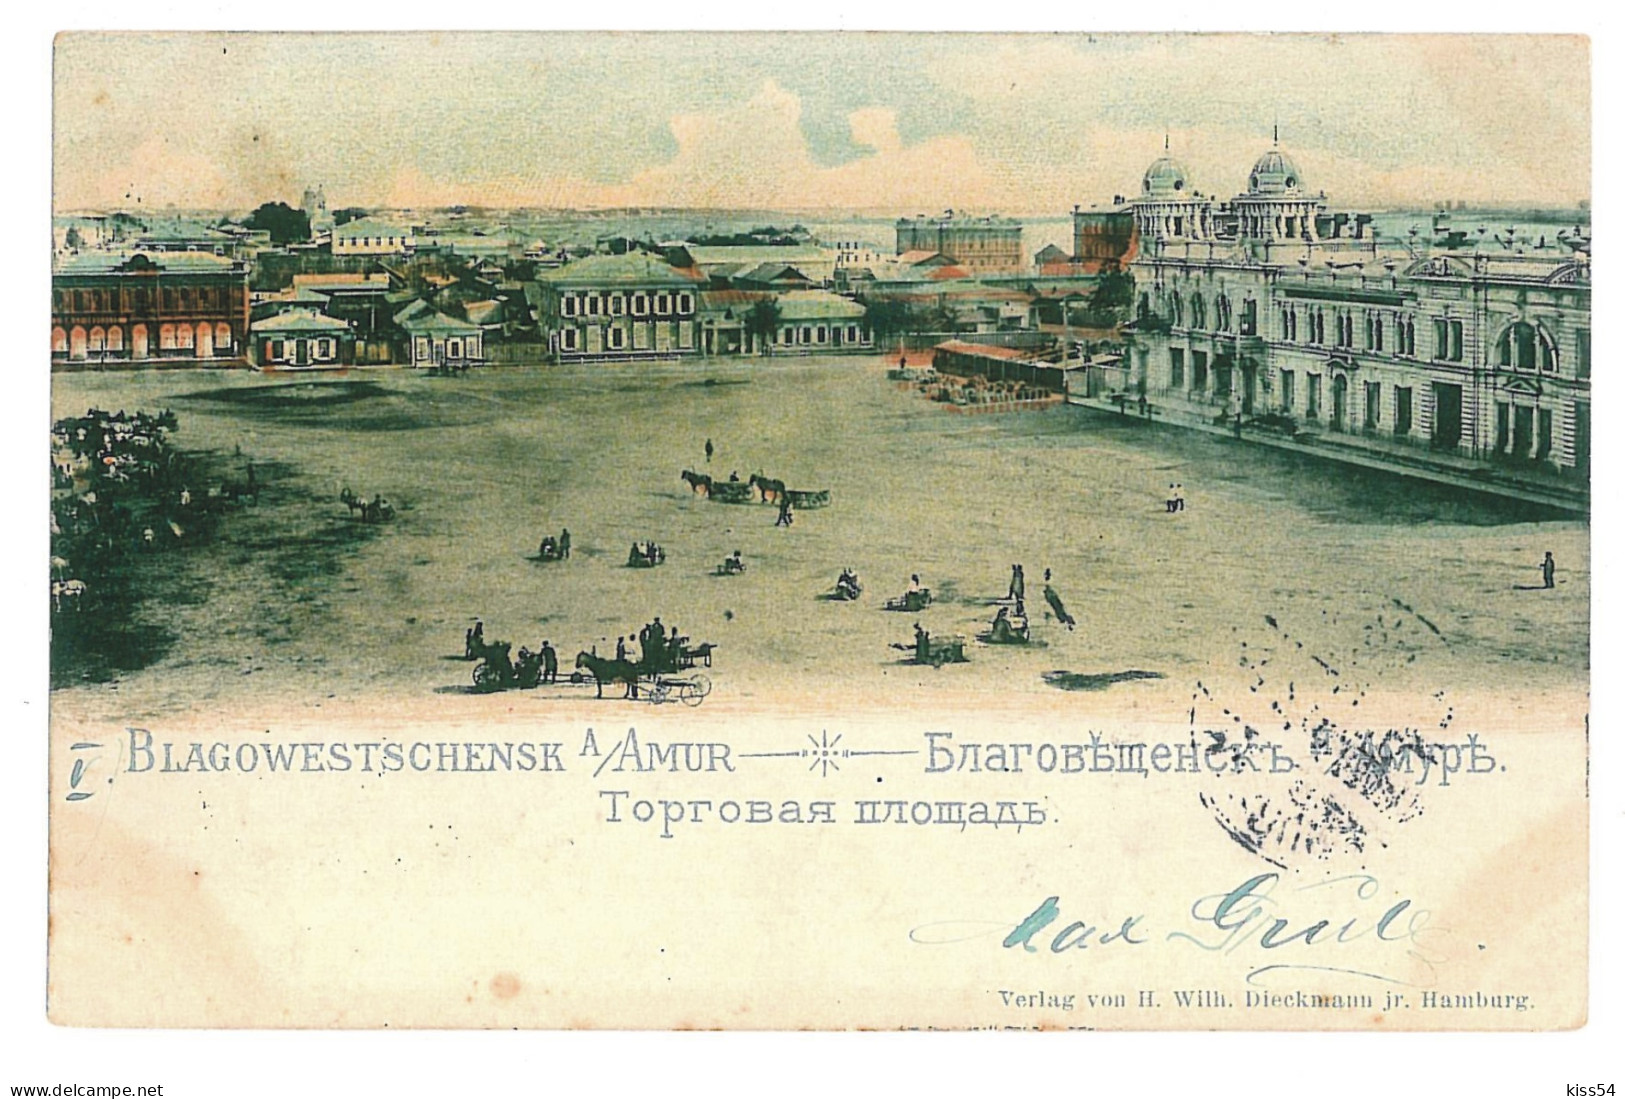 RUS 54 - 9856 BLAGOWESTSCCHENSK AMUR, Russia, Litho, Market - Old Postcard - Used - 1901 - Russia